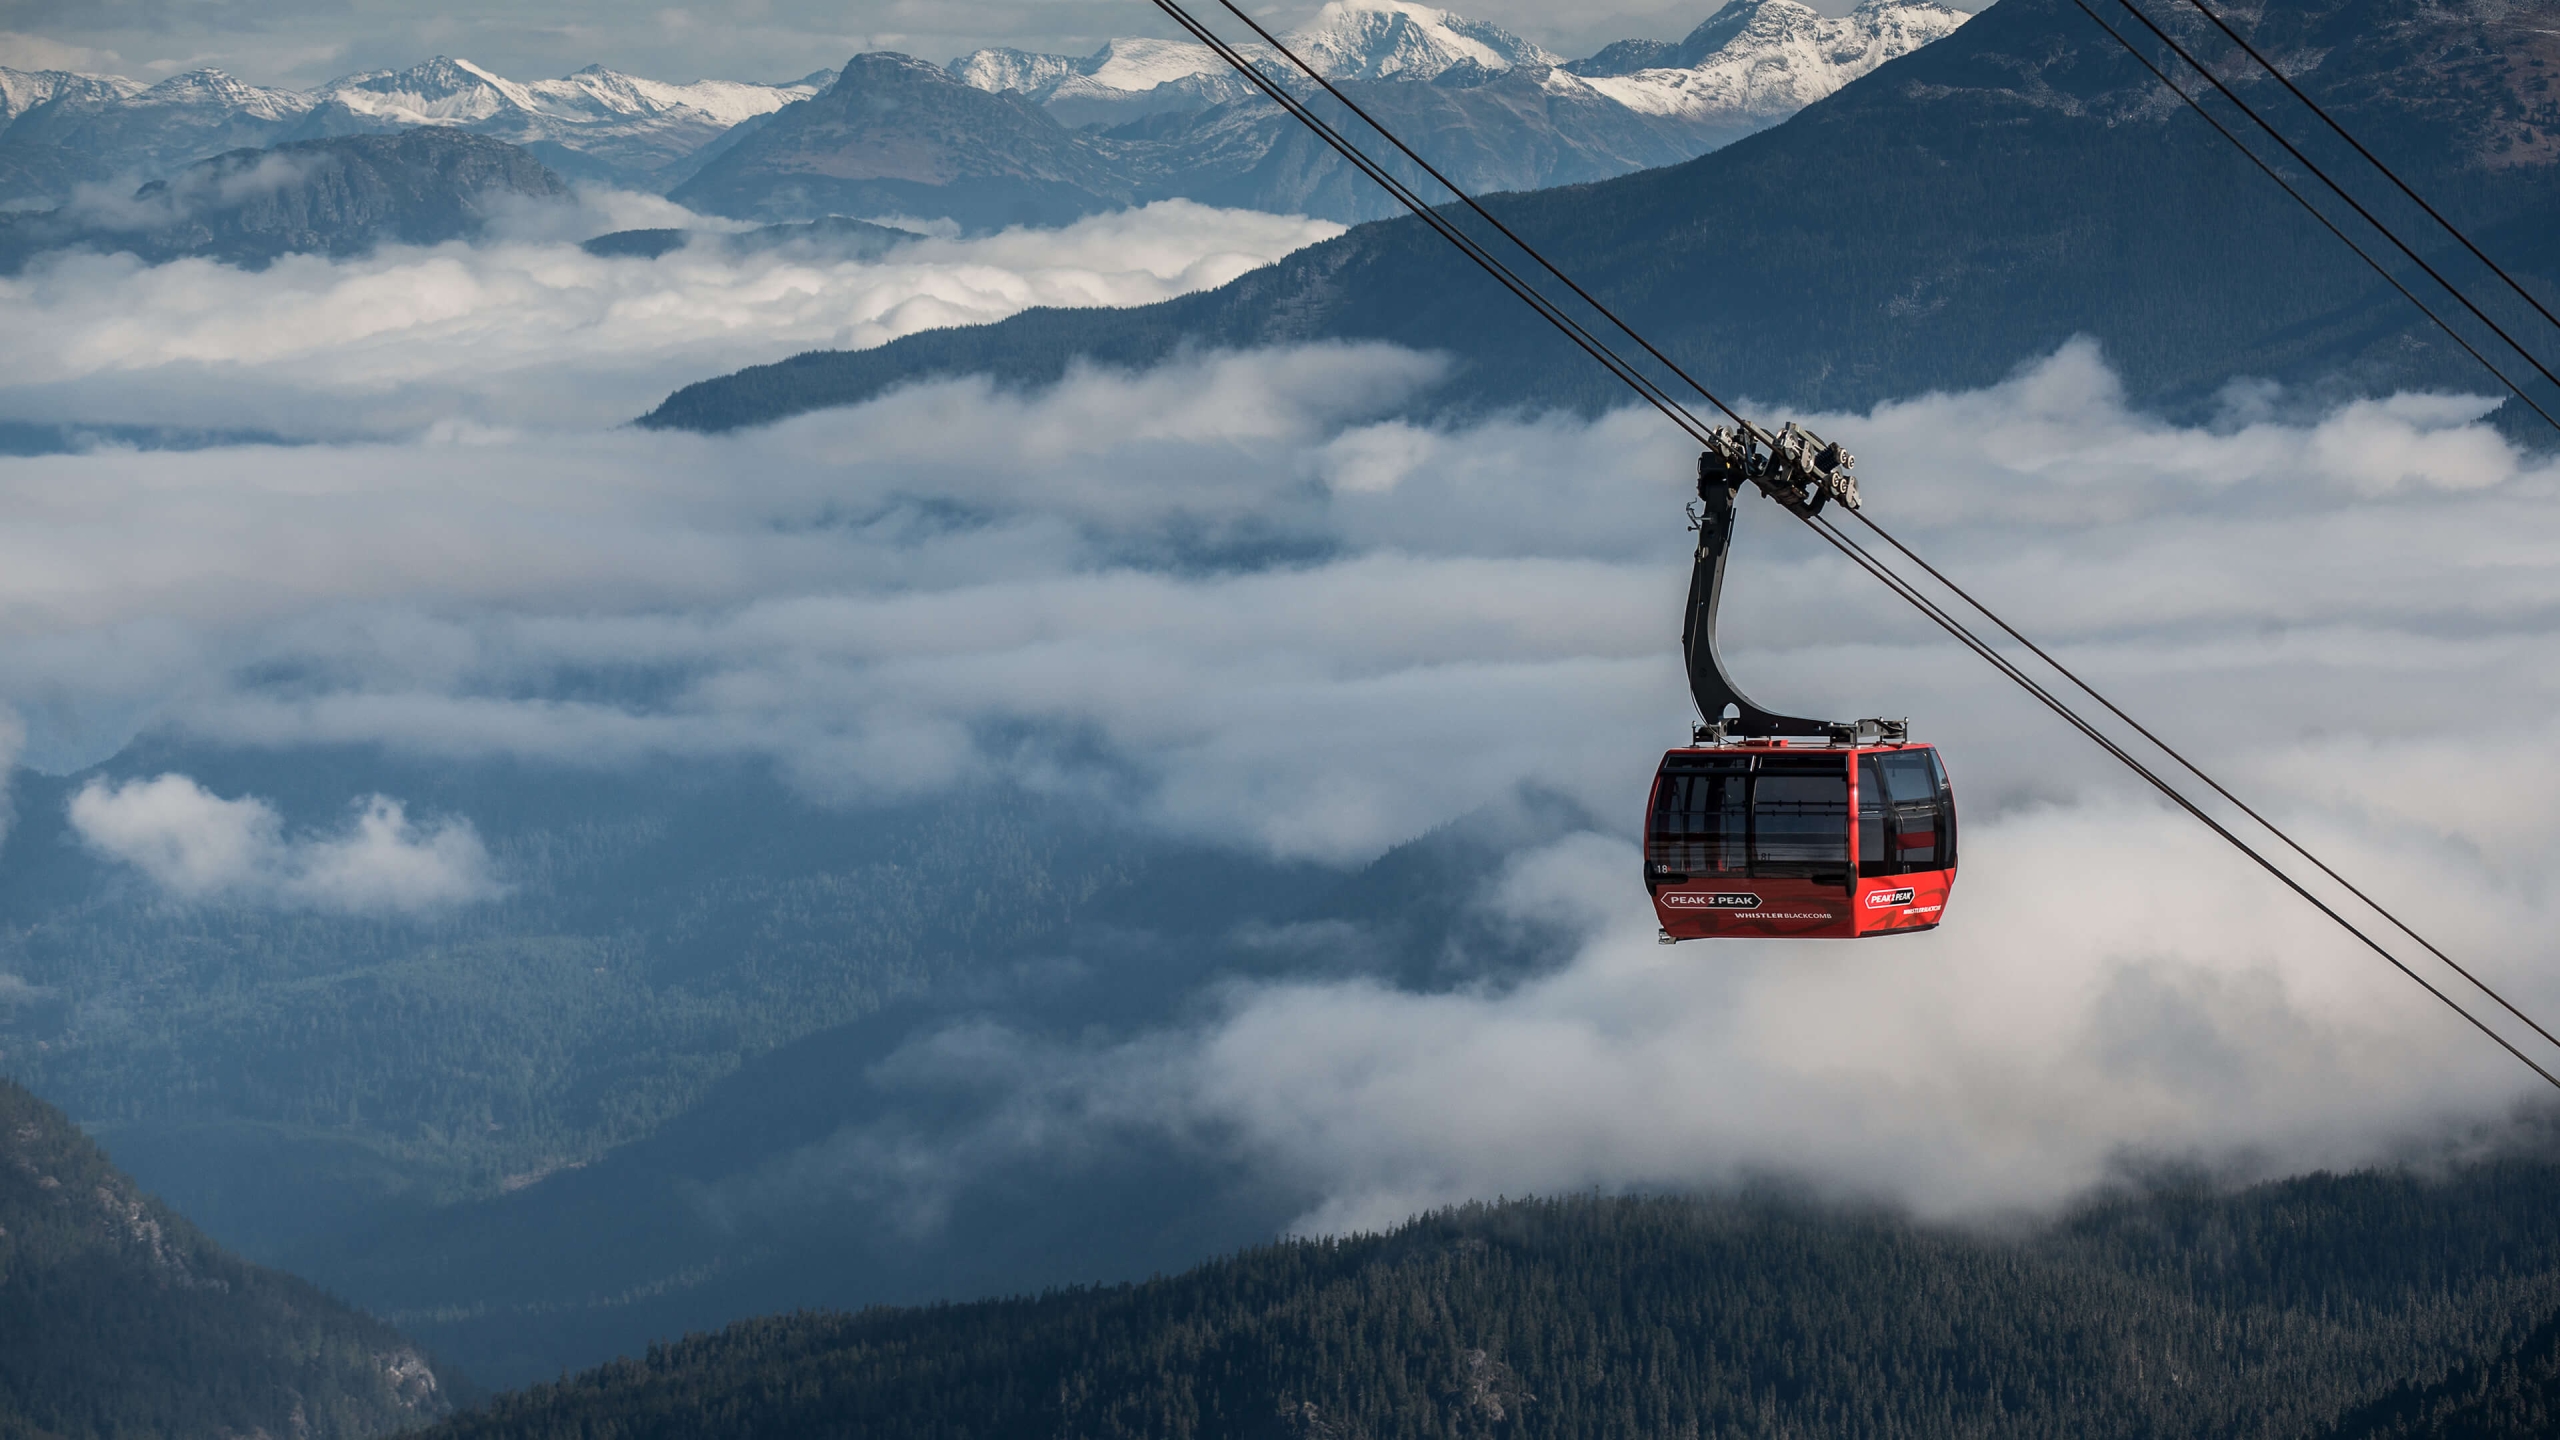 PEAK 2 PEAK Gondola traveling above Whistler, British Columbia. The red gondola is above the clouds and the trees. 